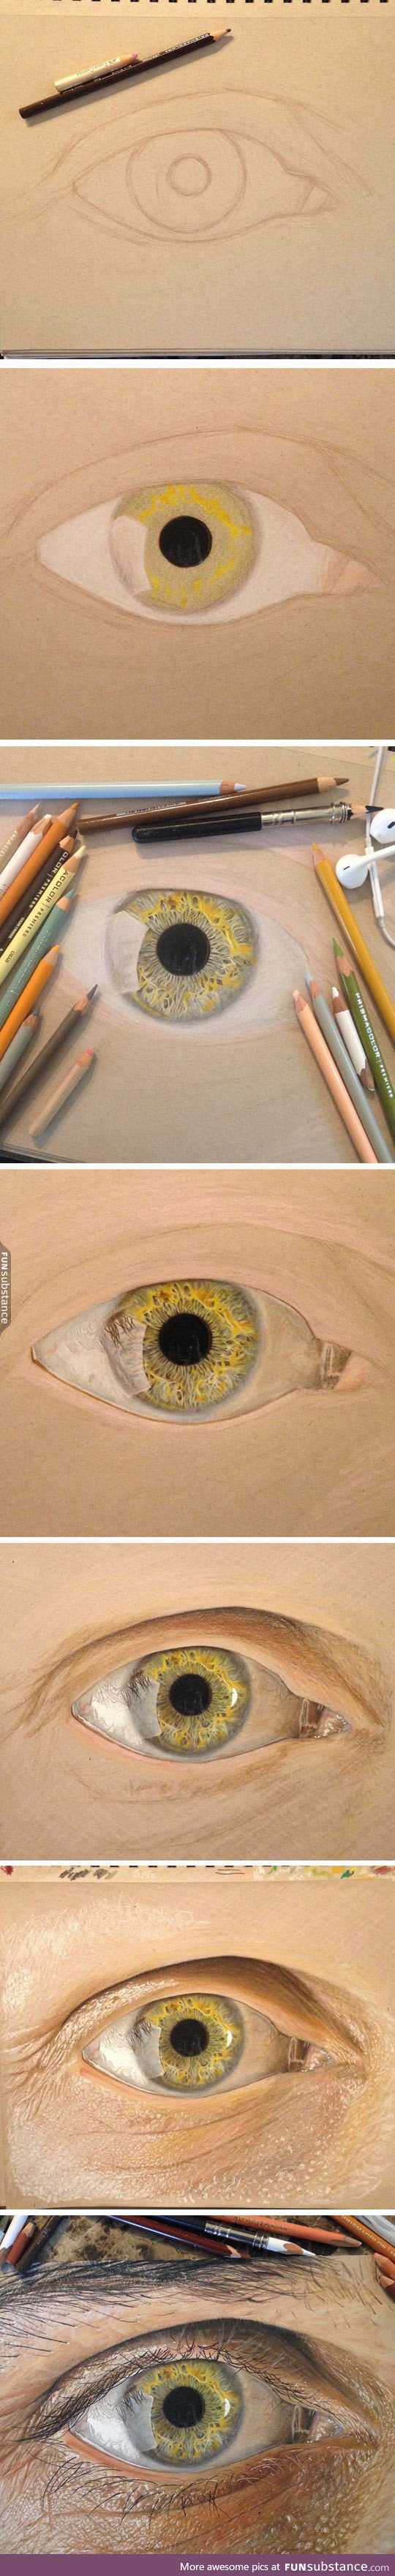 Just a drawing of an eye